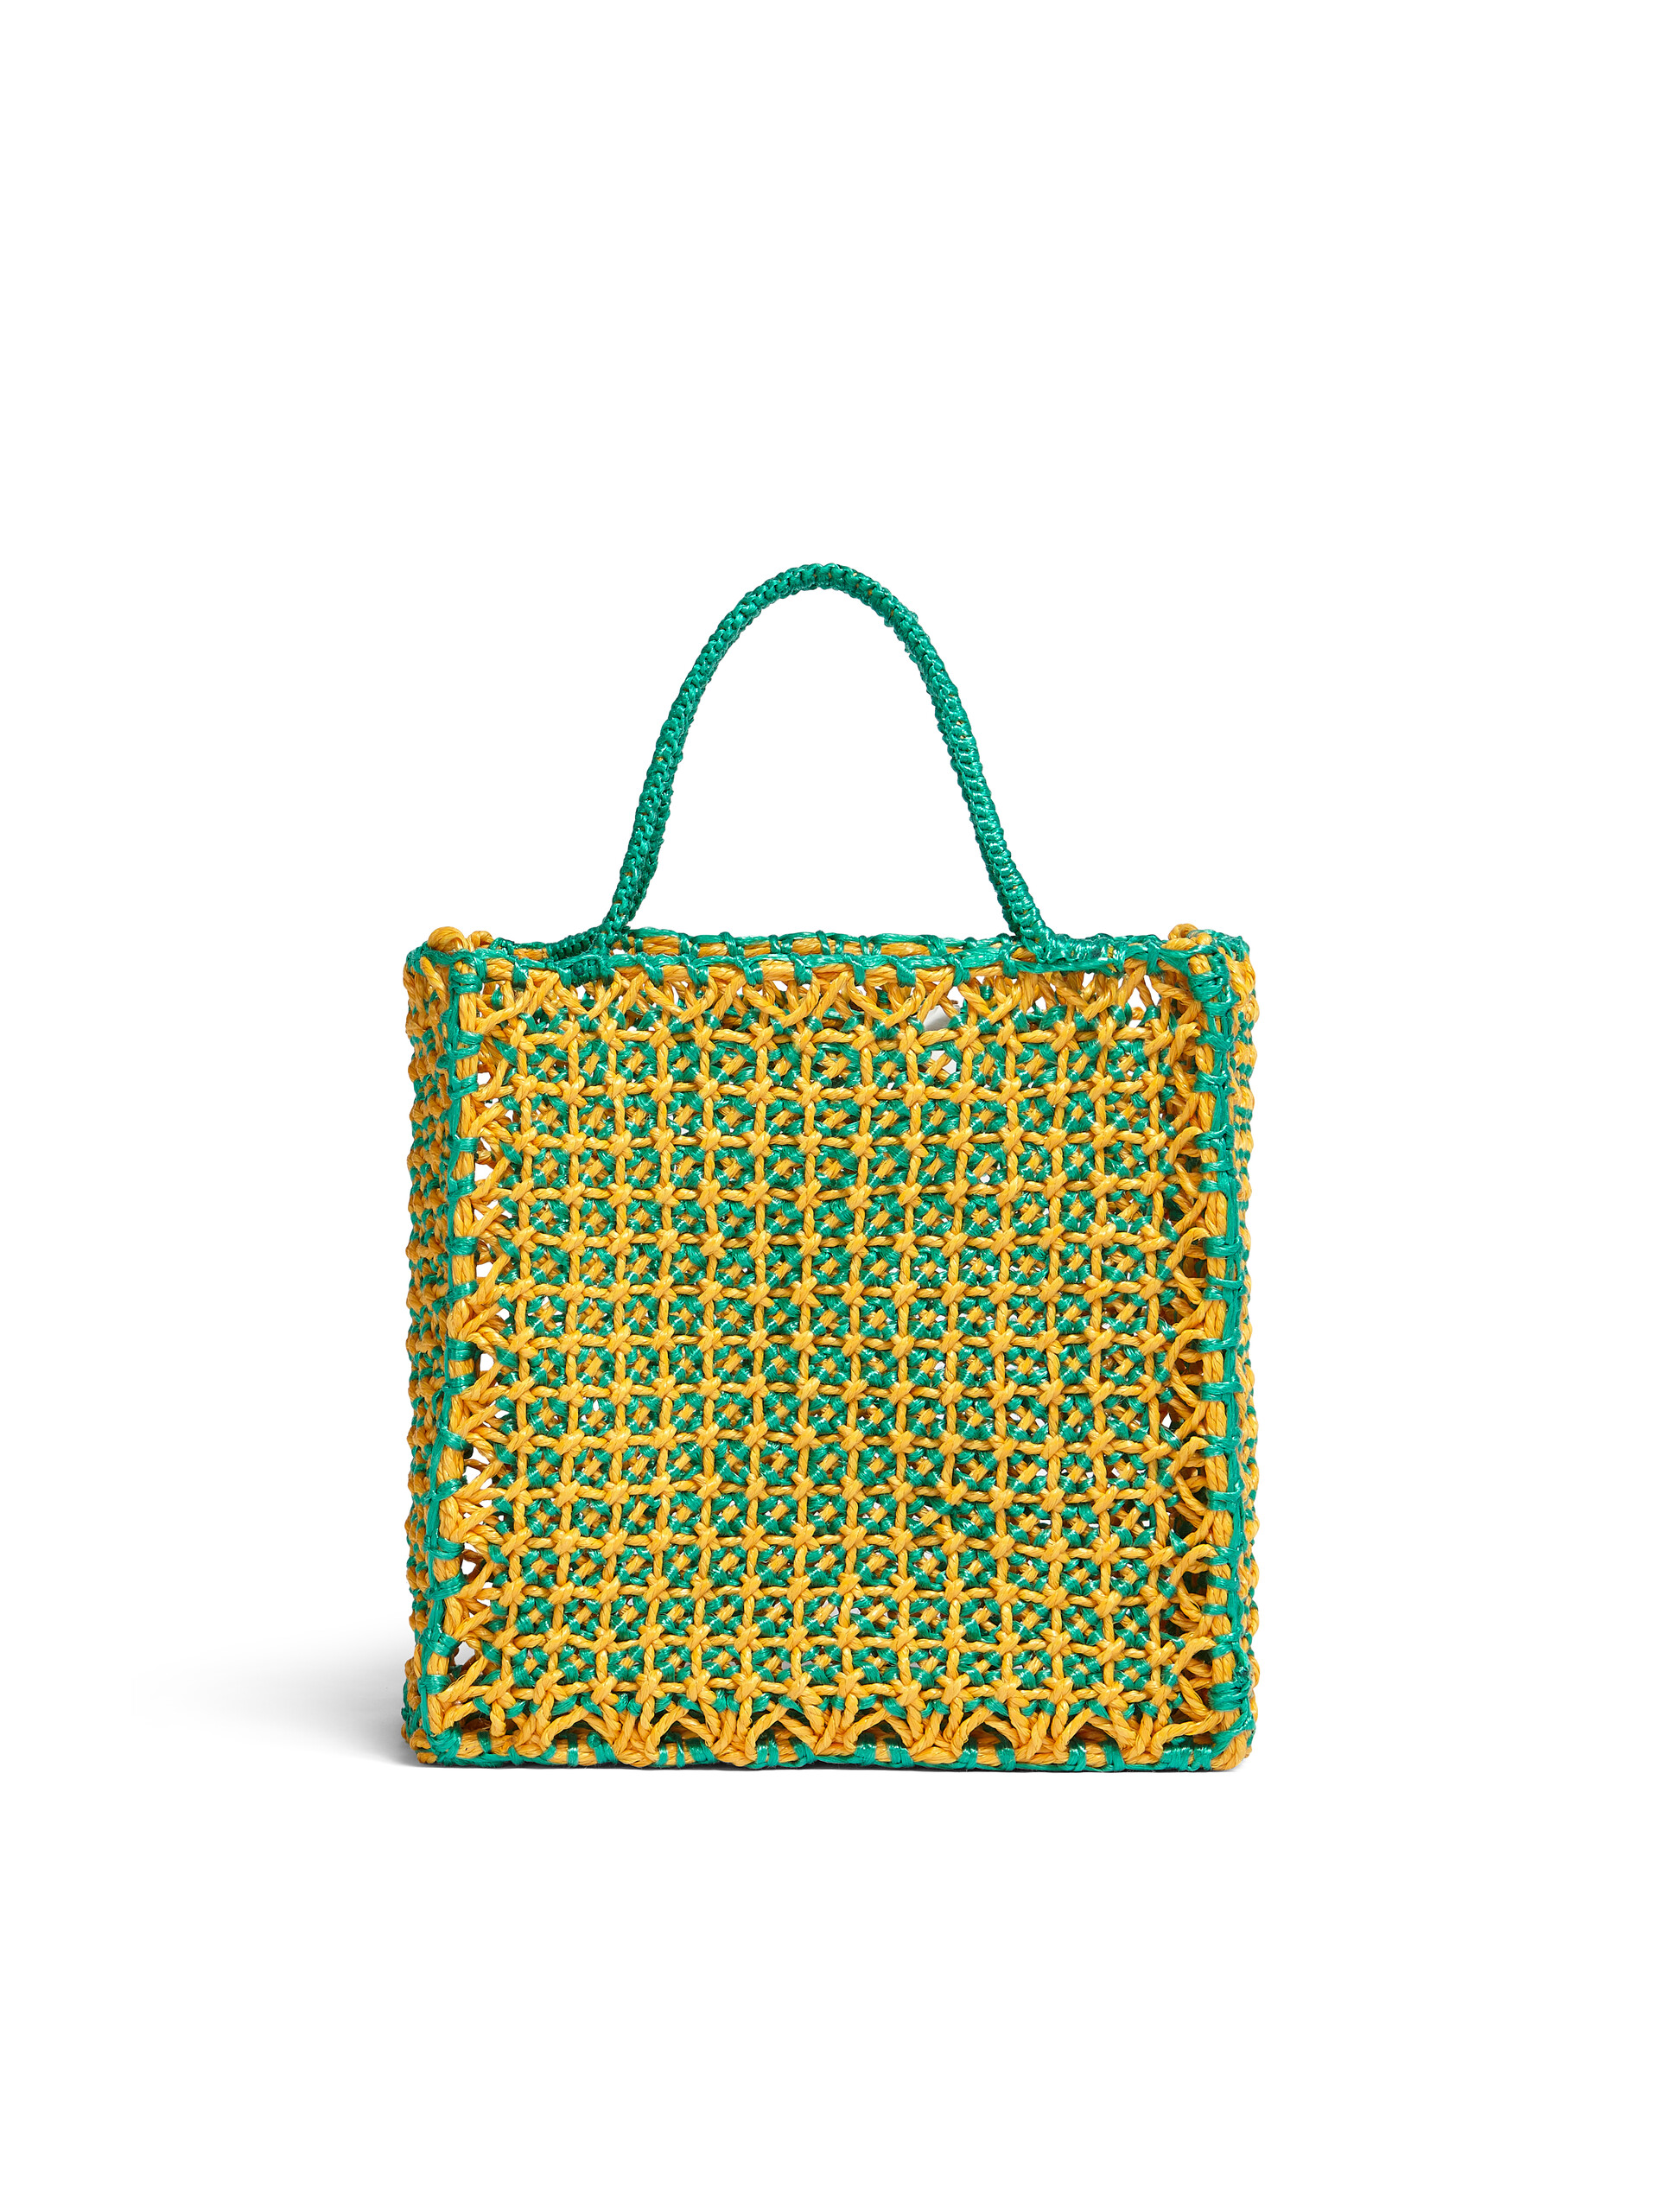 MARNI MARKET large bag in green and yellow crochet - Bags - Image 3